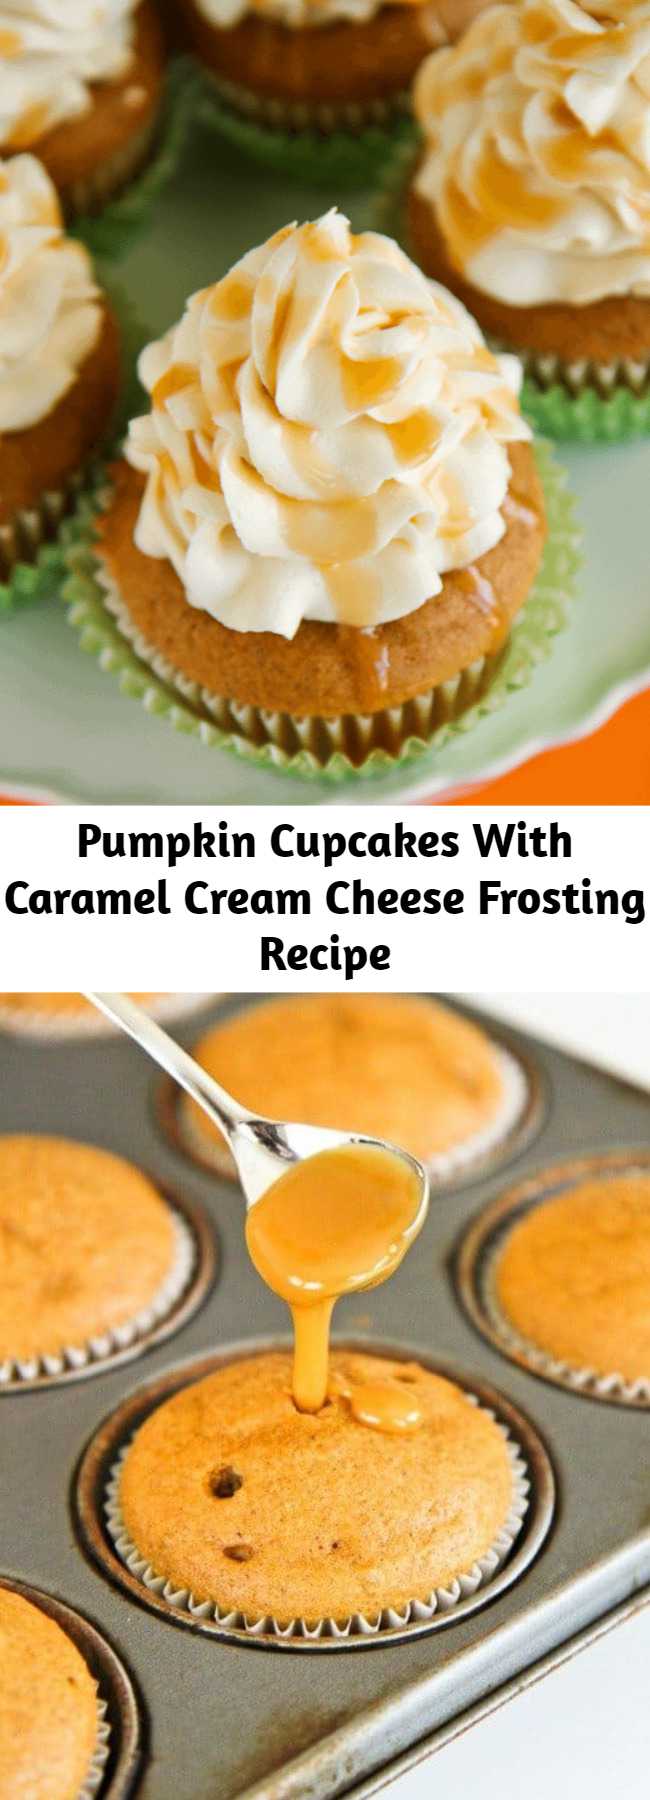 Pumpkin Cupcakes With Caramel Cream Cheese Frosting Recipe - A delicious blend of pumpkin, caramel and cream cheese, these pumpkin cupcakes are a perfect fall dessert. If you love pumpkin, put these on your baking list. They are DELISH!